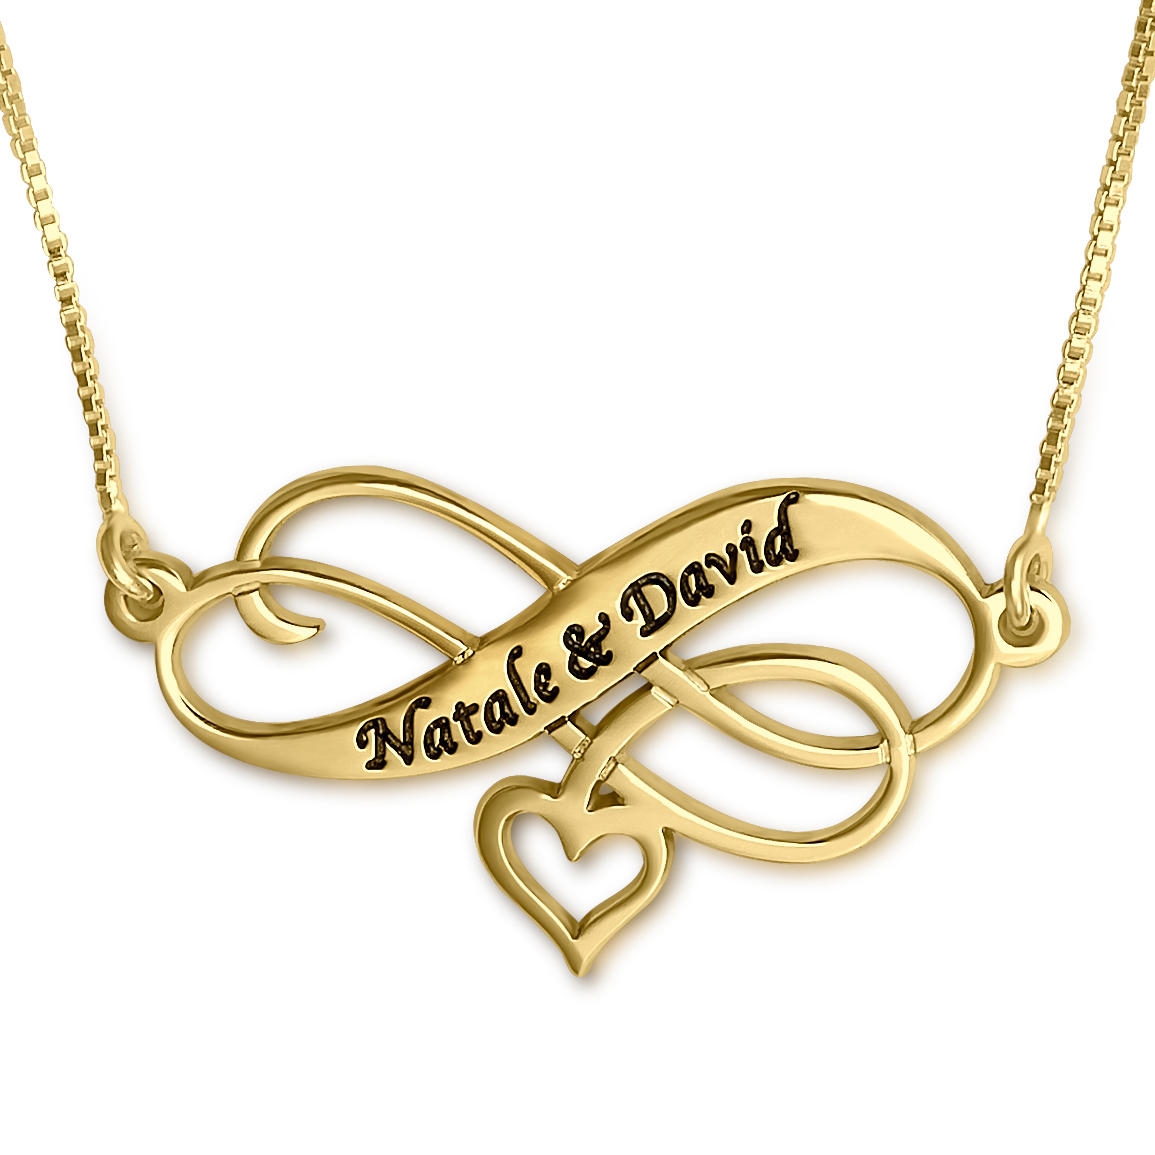 Infinity Heart Couples Name Necklace, 24k Gold Plated - 1